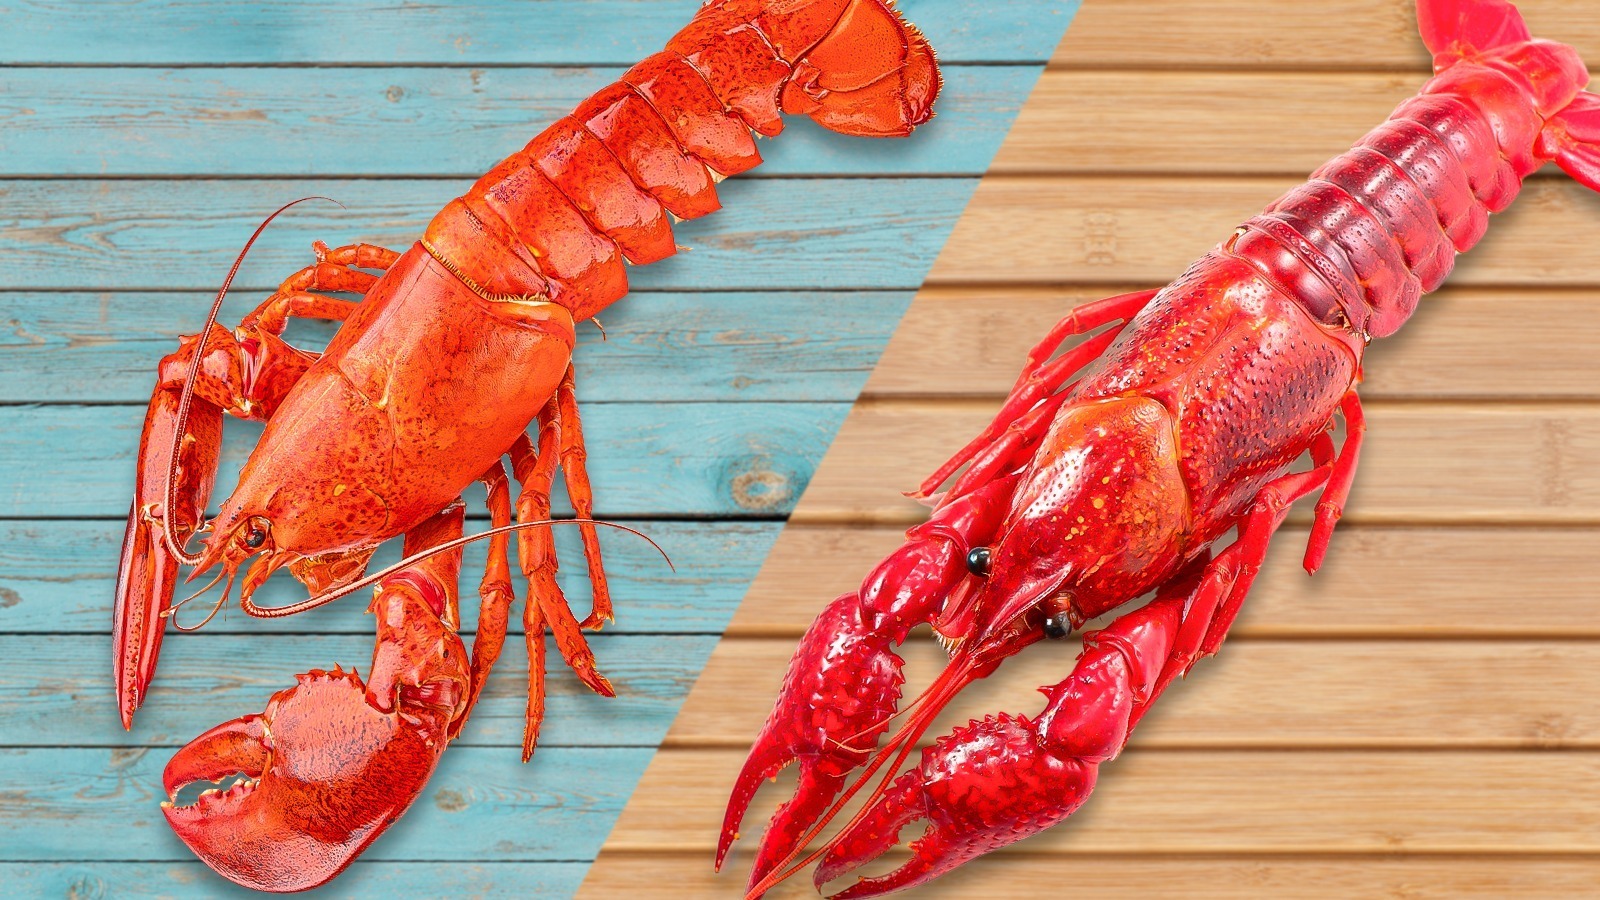 https://www.tastingtable.com/img/gallery/the-difference-between-lobster-and-crawfish/l-intro-1702929533.jpg